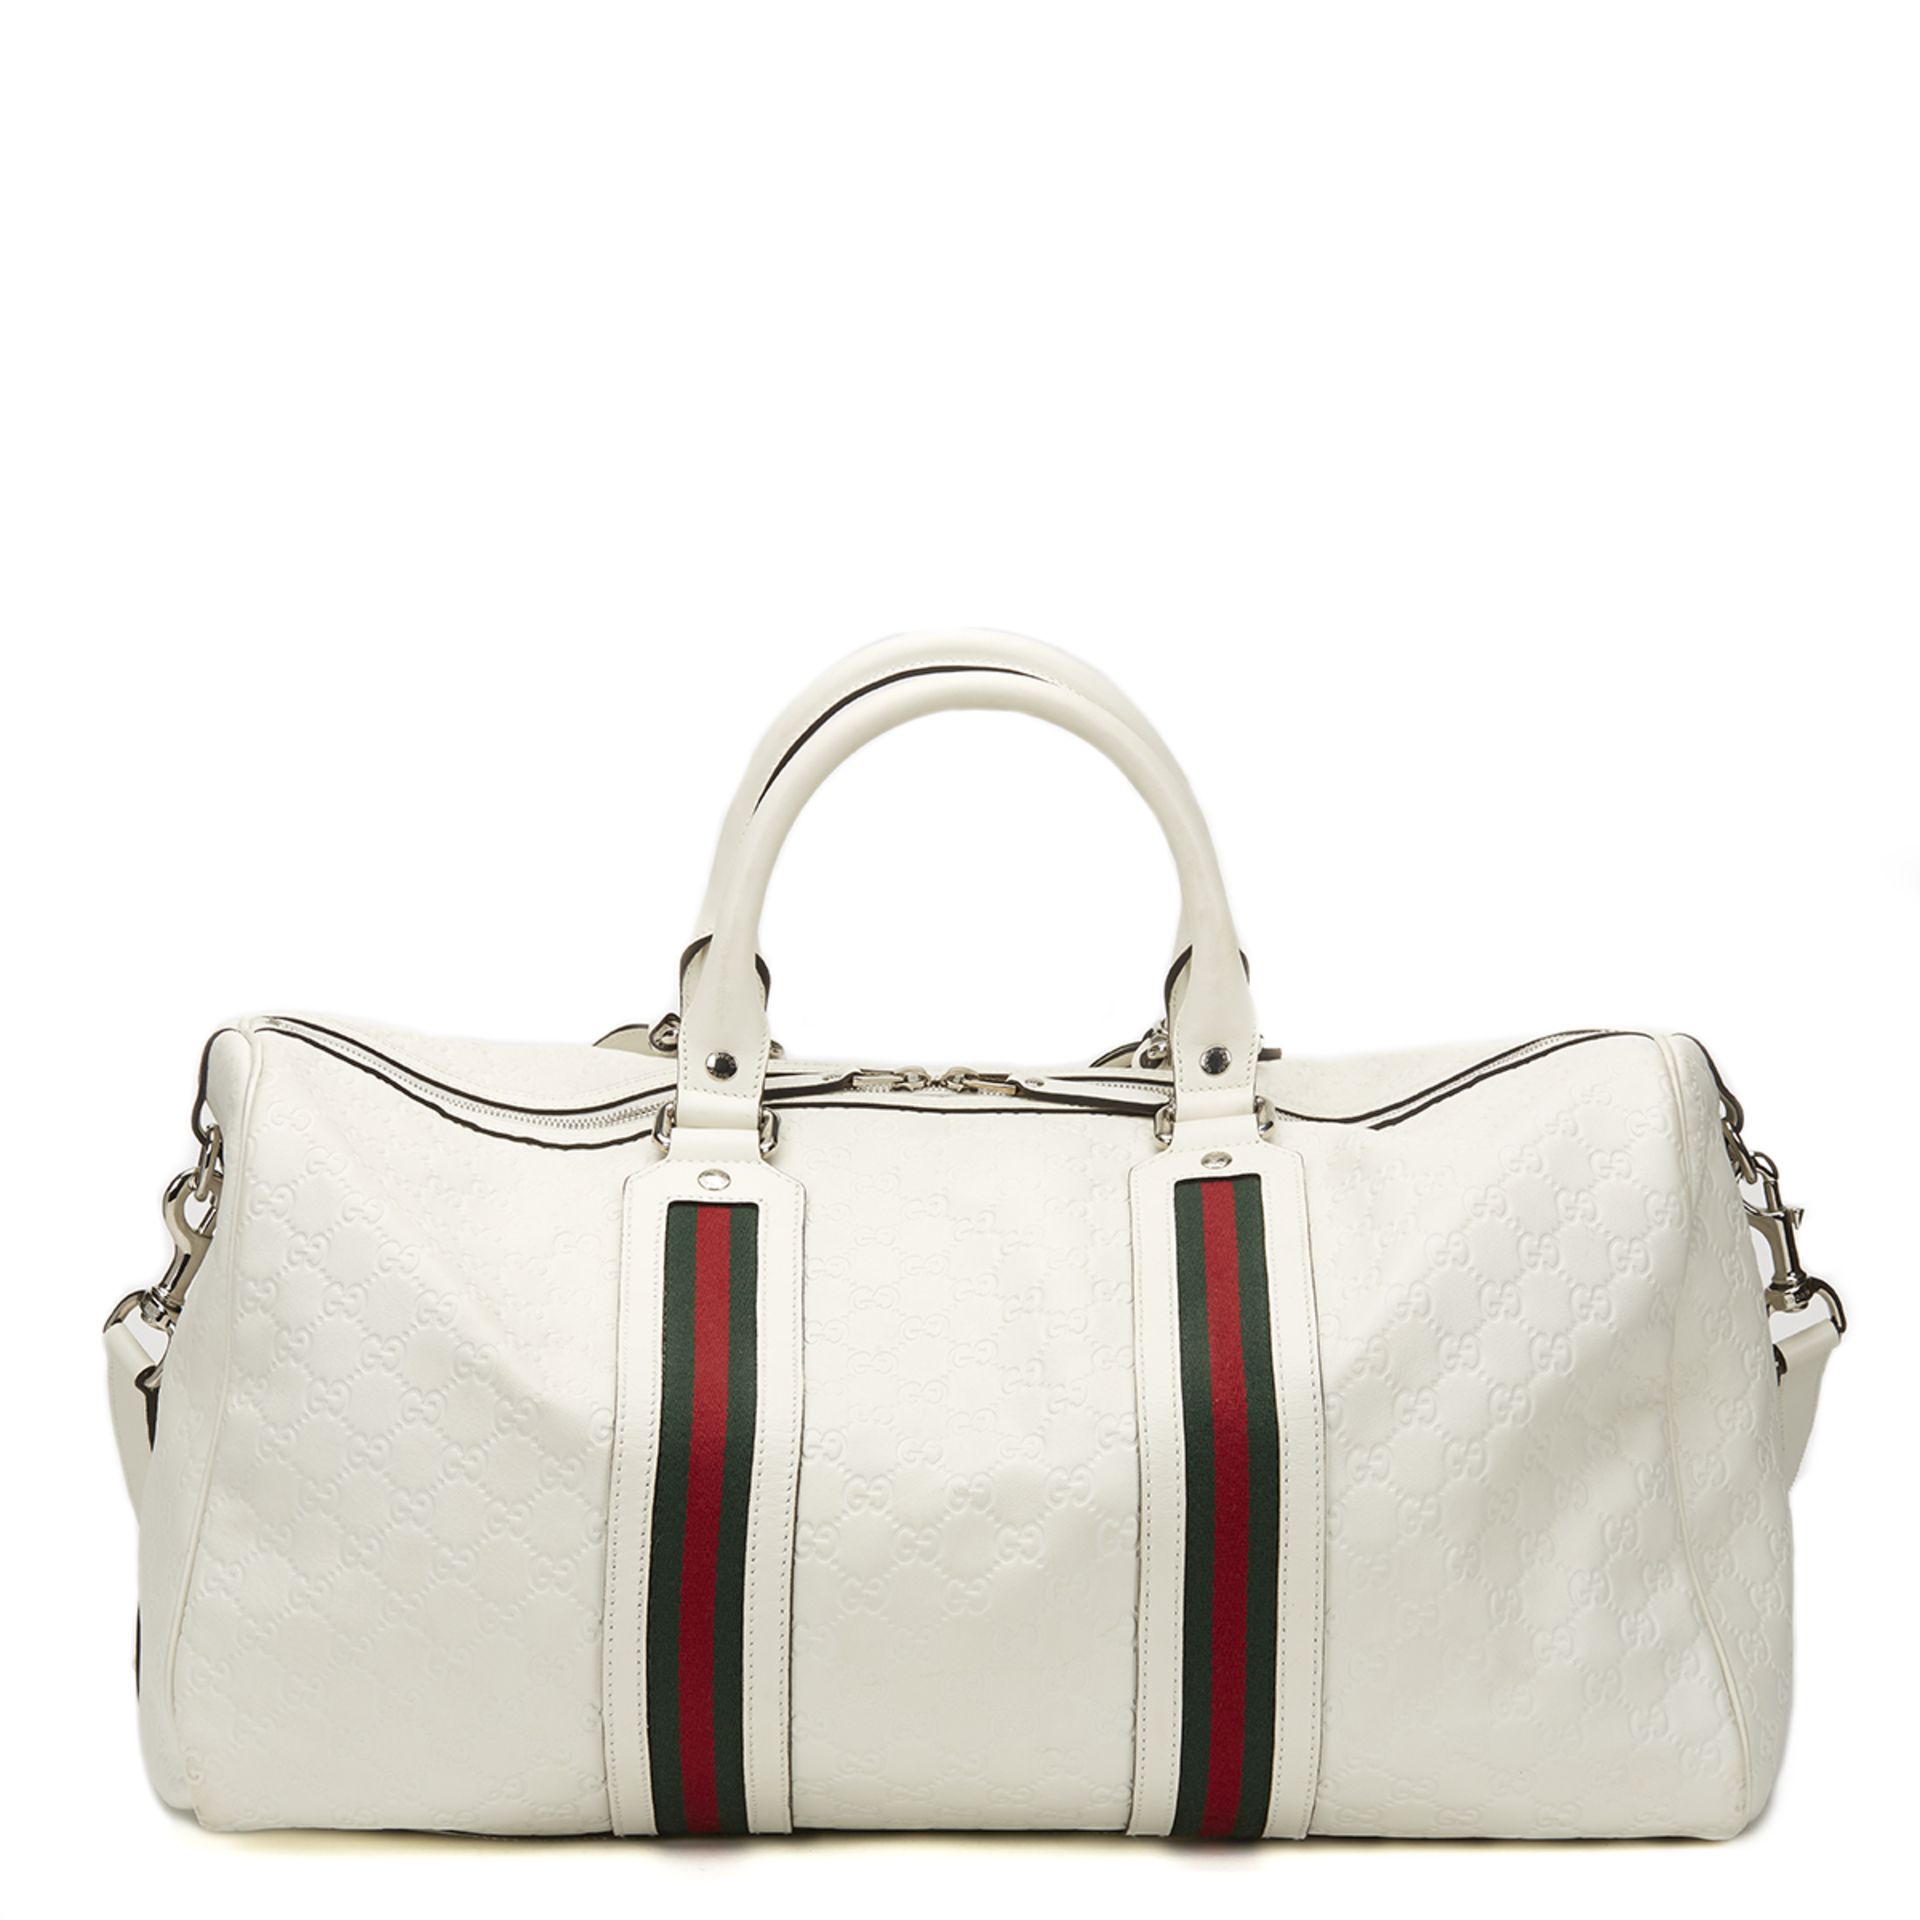 Gucci, Holdall - Image 4 of 8